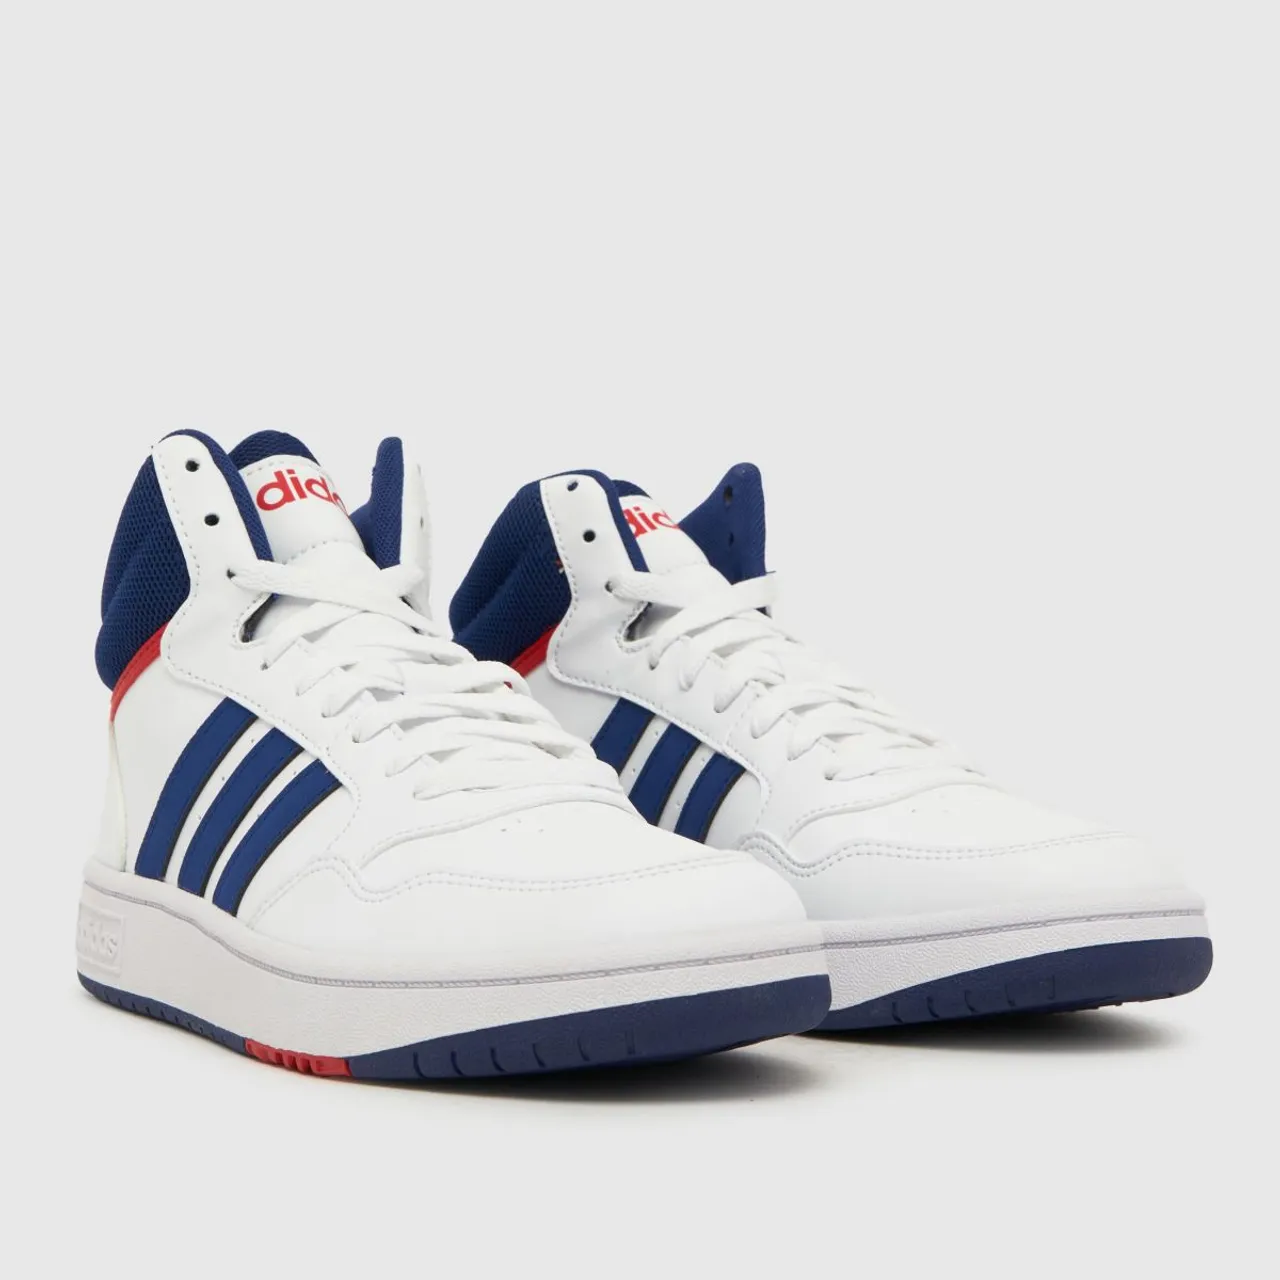 Adidas White & Navy Hoops Mid 3.0 Boys Youth Trainers